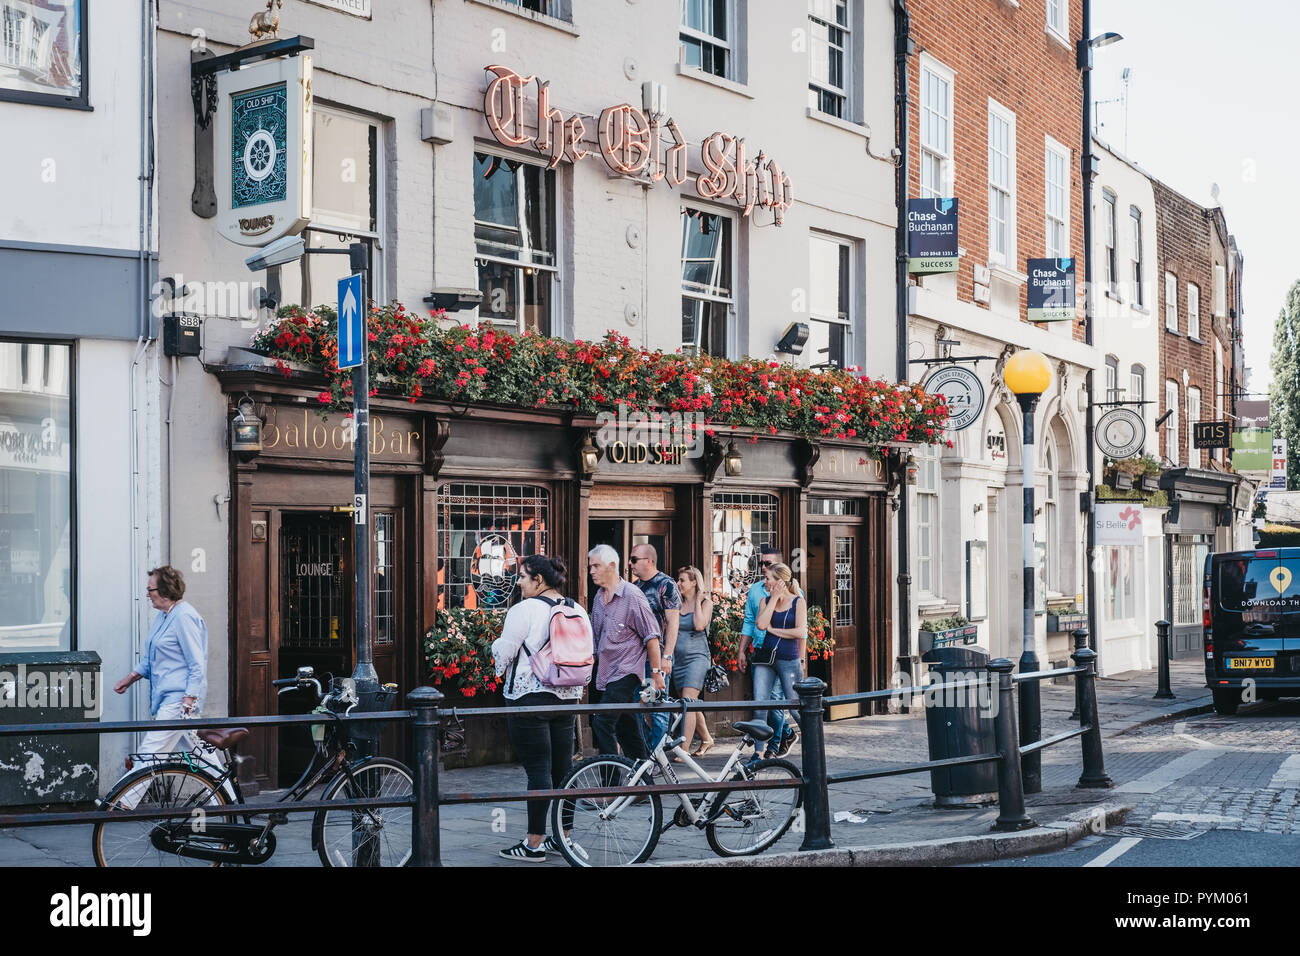 London, UK - August 1, 2018. People walking in front of The Old Ship pub in Richmond, a suburban town in south-west London famous for a large number o Stock Photo